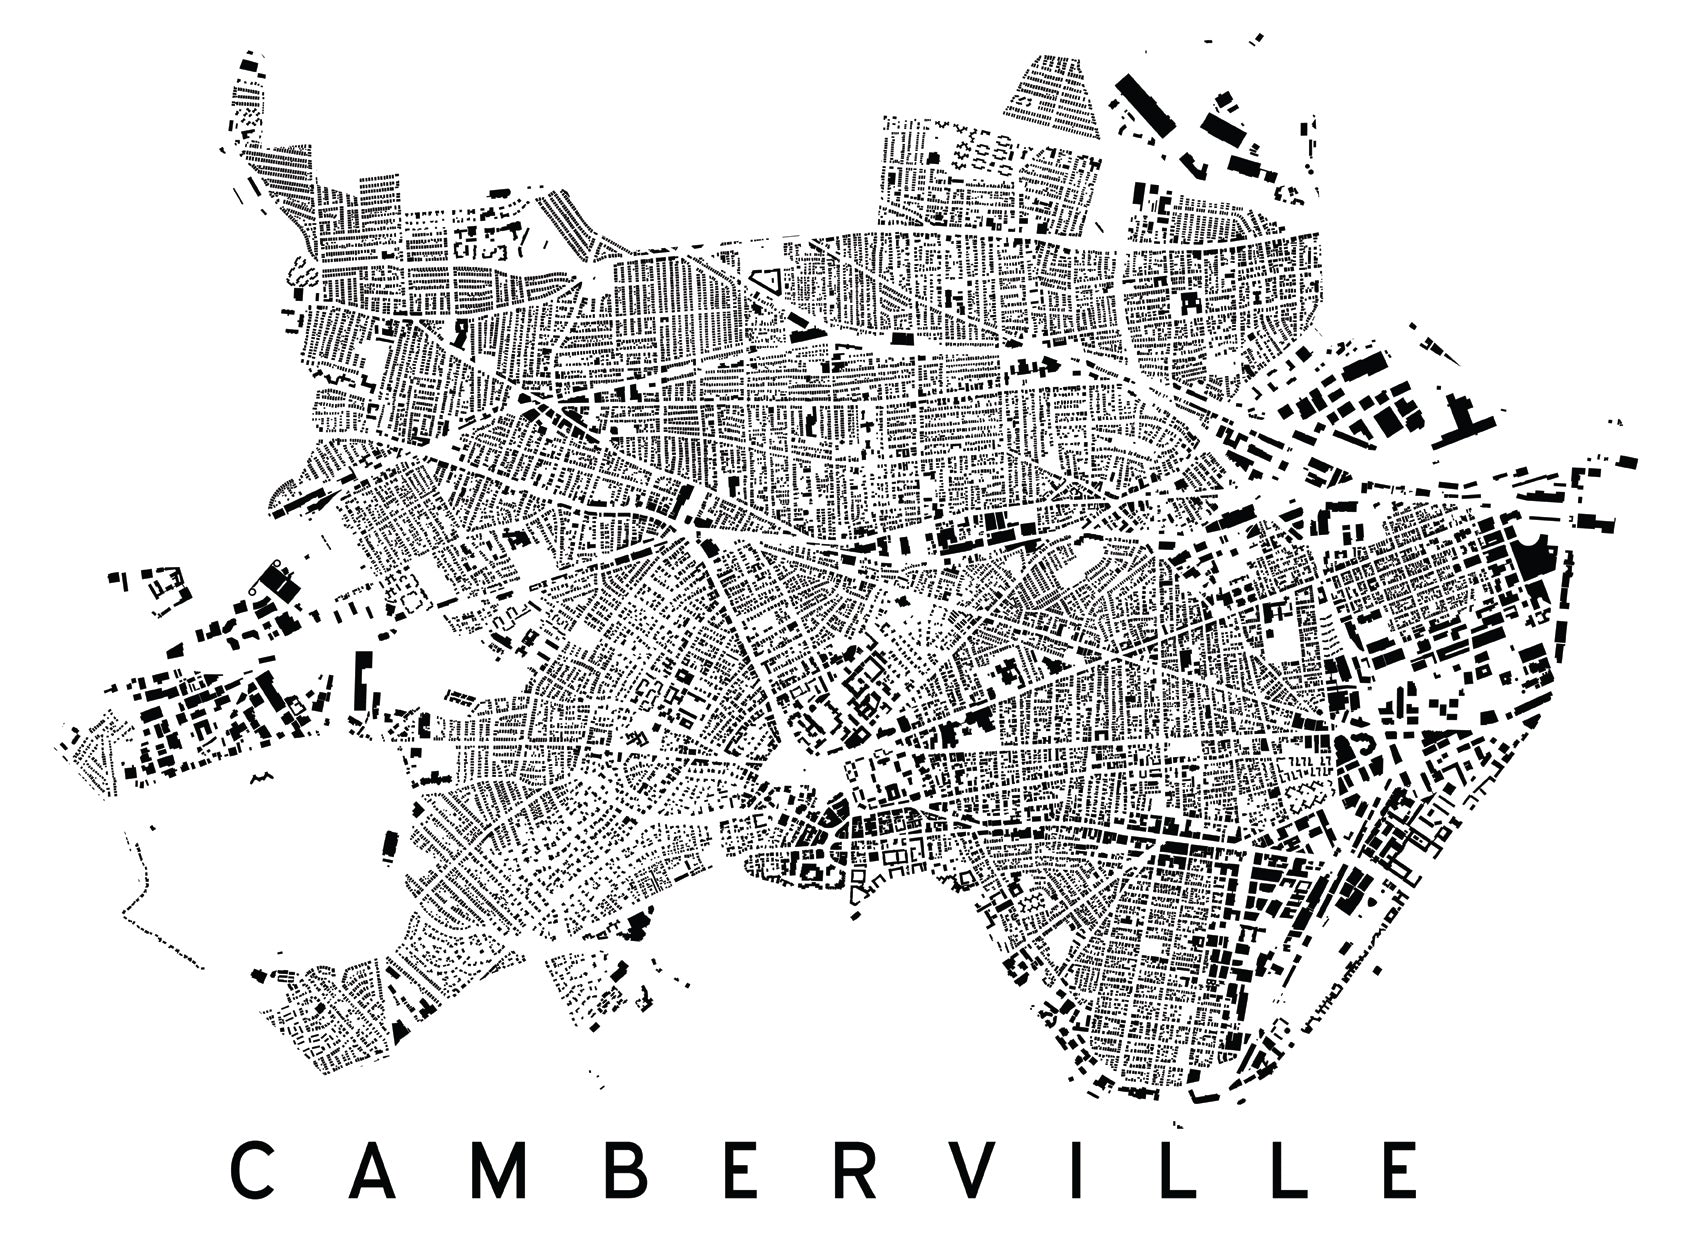 Camberville (Cambridge and Somerville) City Plan Print